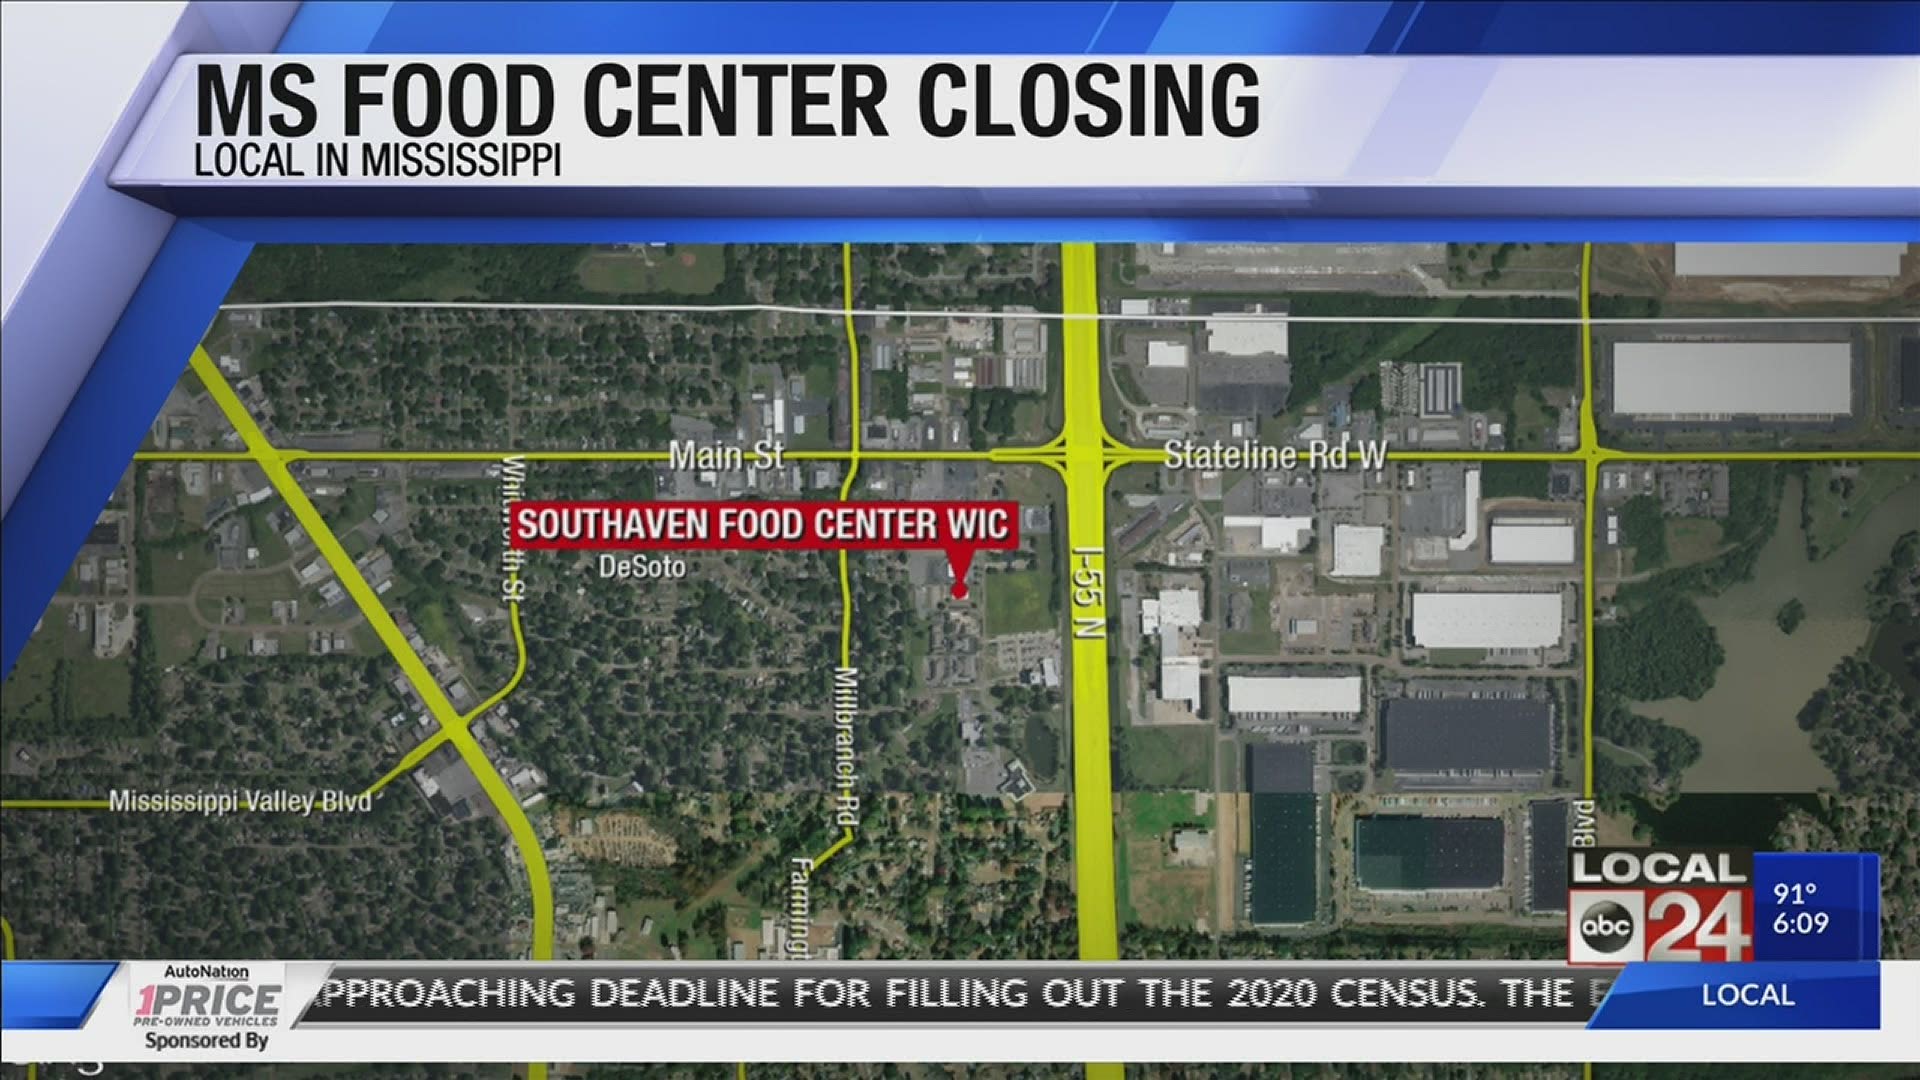 Southaven’s food center will close September 30, 2020